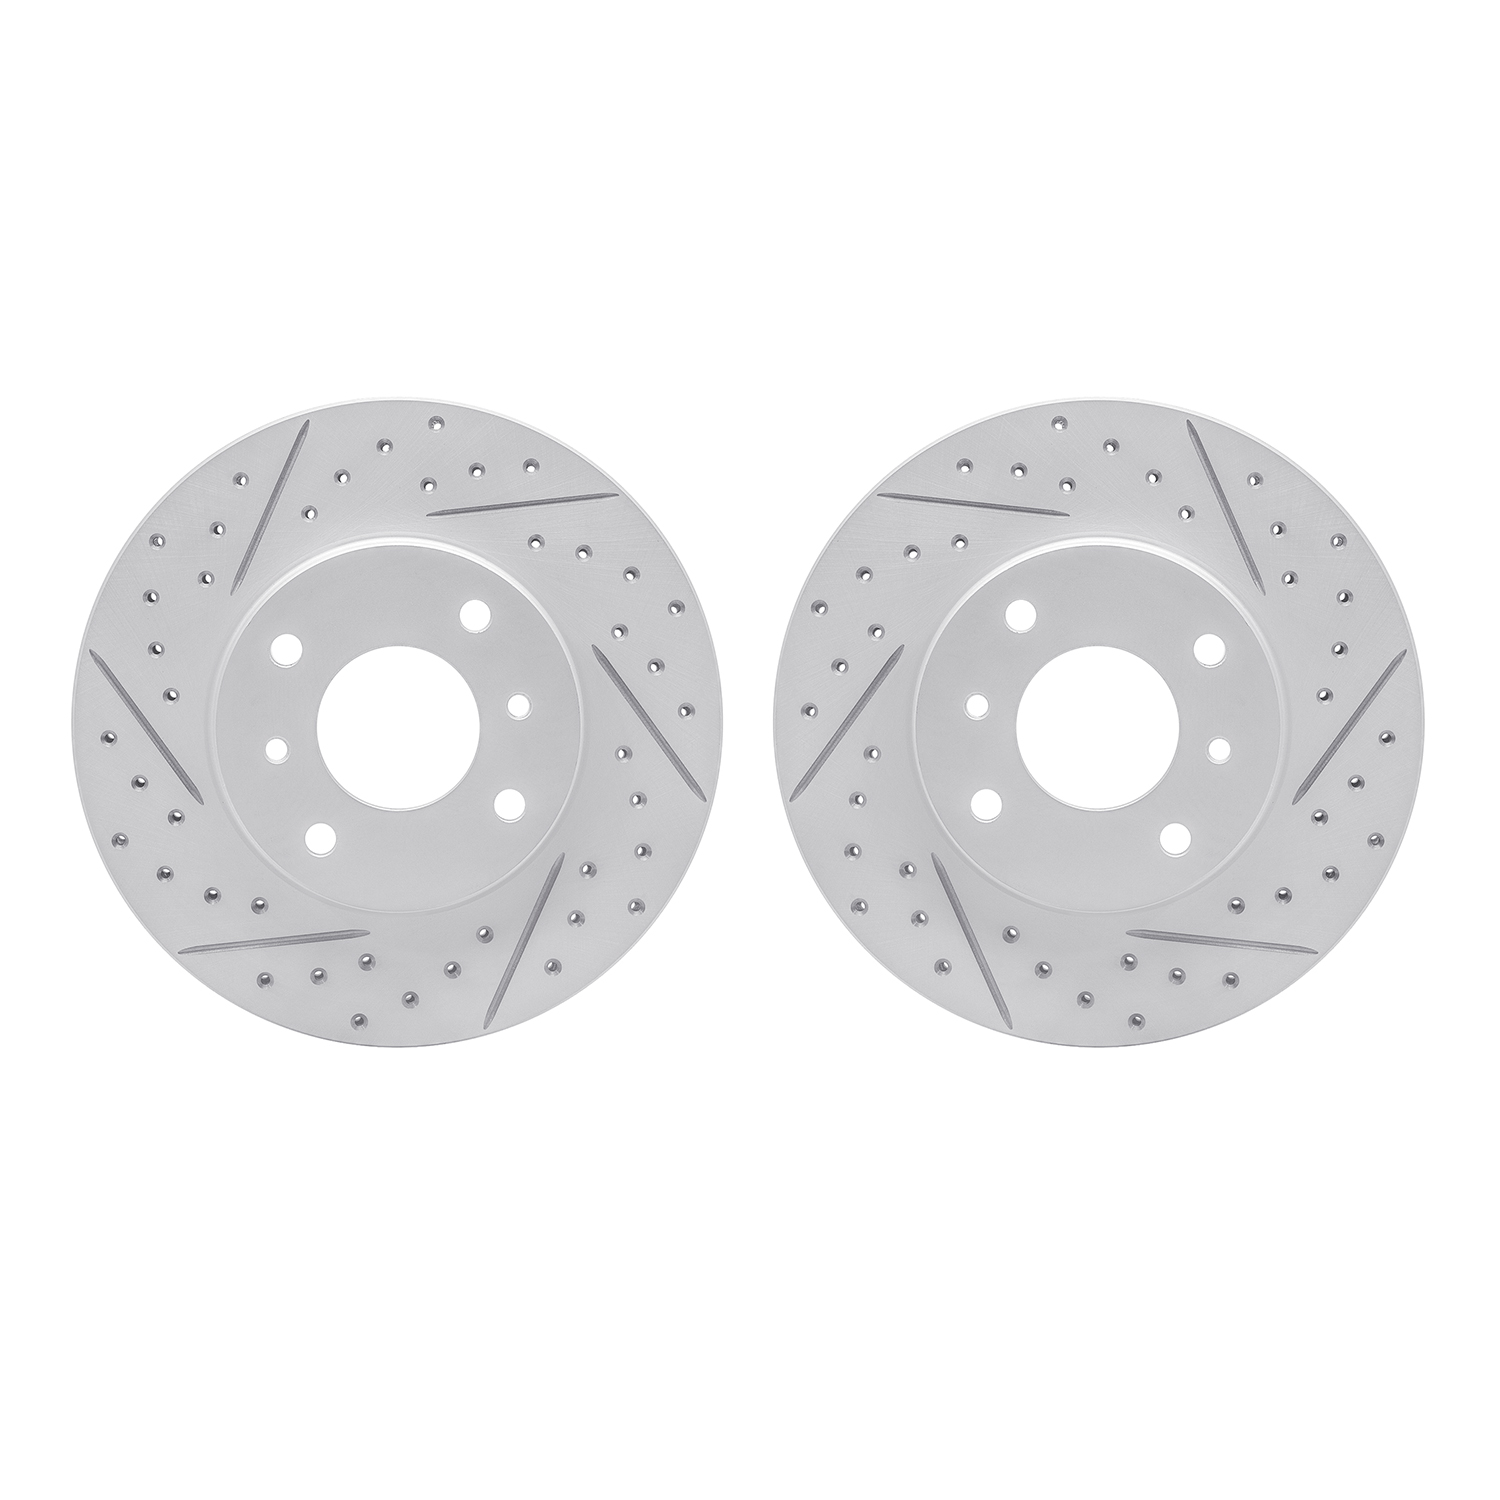 2002-67003 Geoperformance Drilled/Slotted Brake Rotors, 1993-2006 Infiniti/Nissan, Position: Front